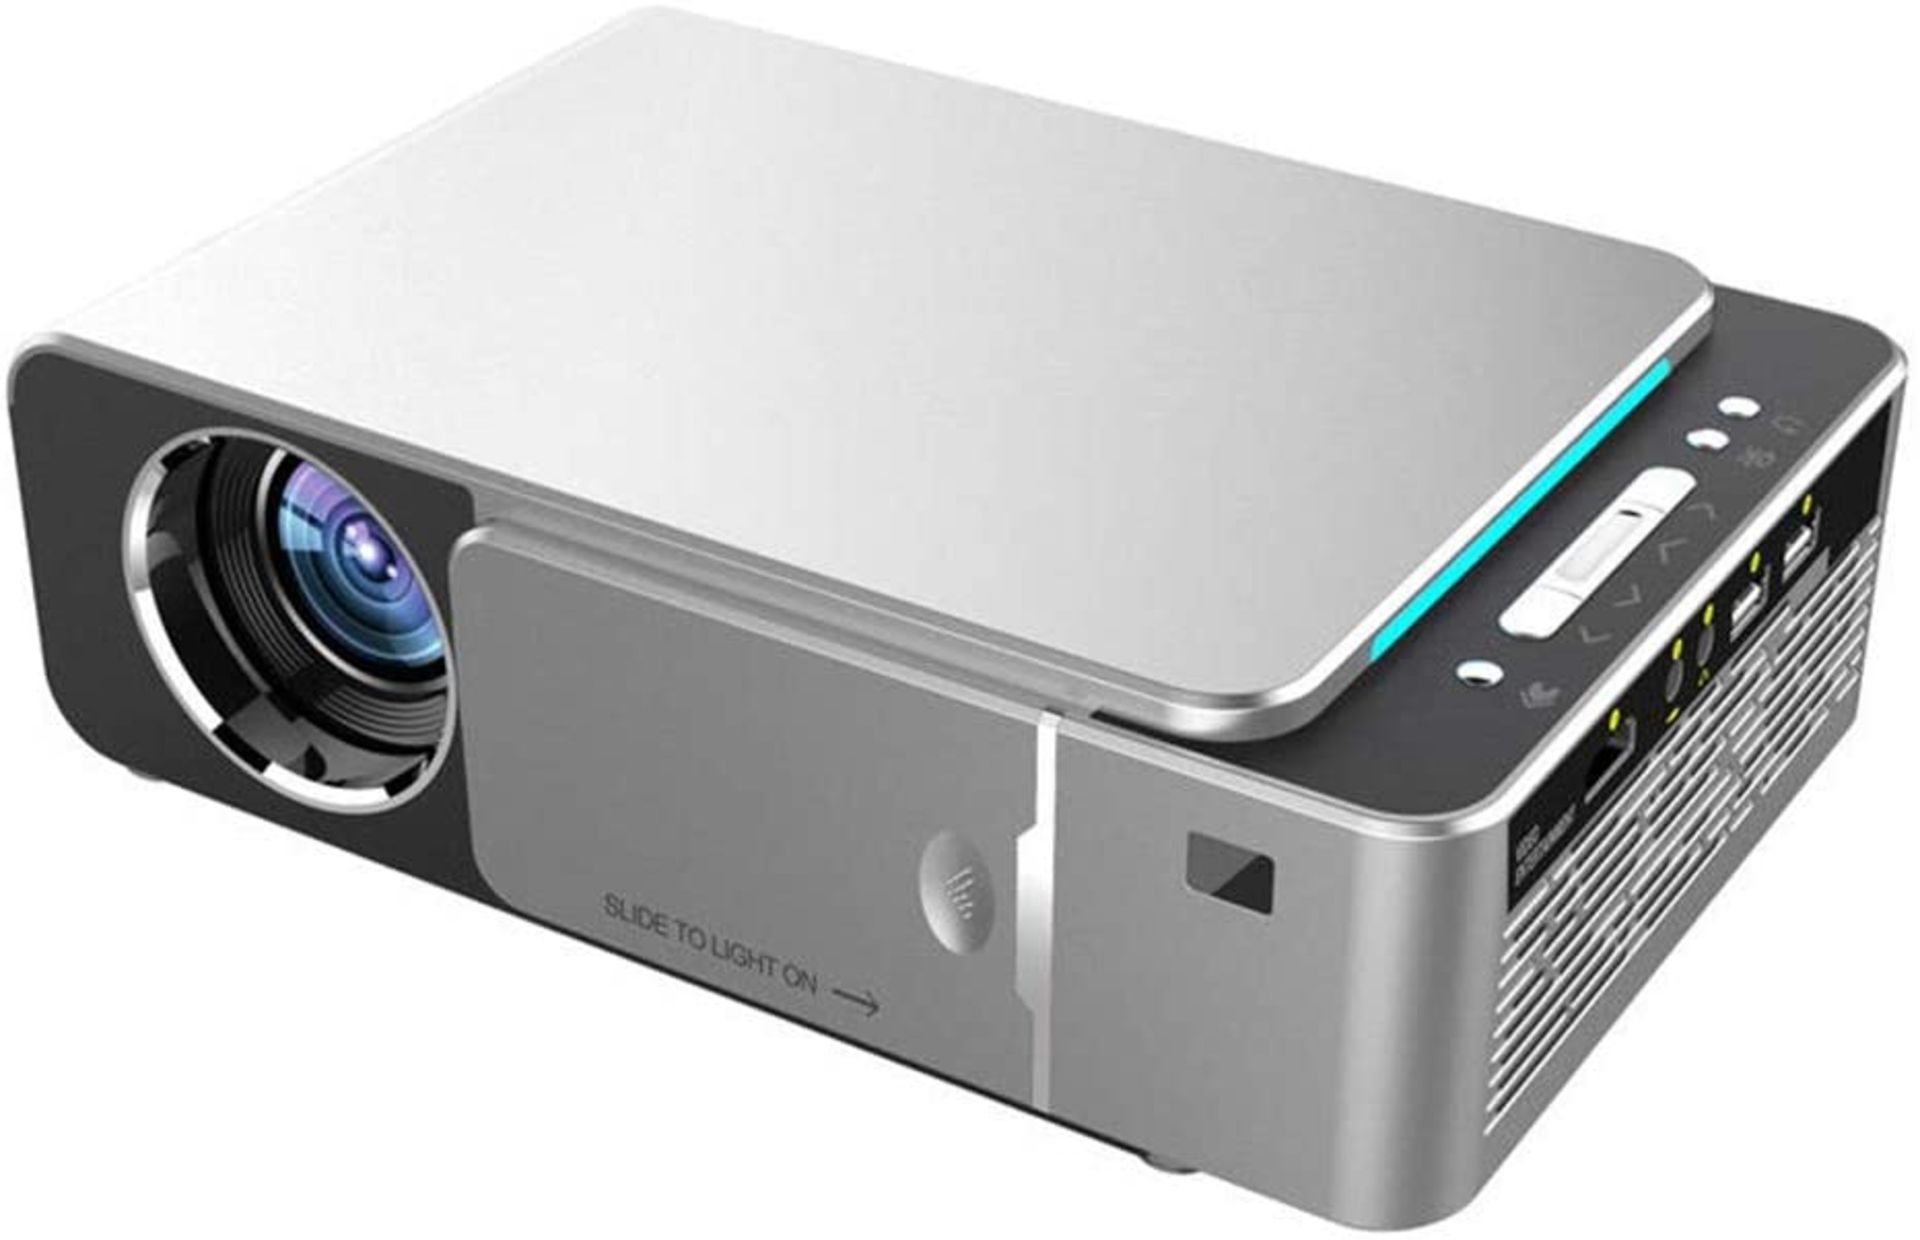 Rrp £140 Oipoodde Projector Lcd Projector 1280 X 720P Hd 3500 Lumens Led Multimedia Home Theater Vid - Image 2 of 4